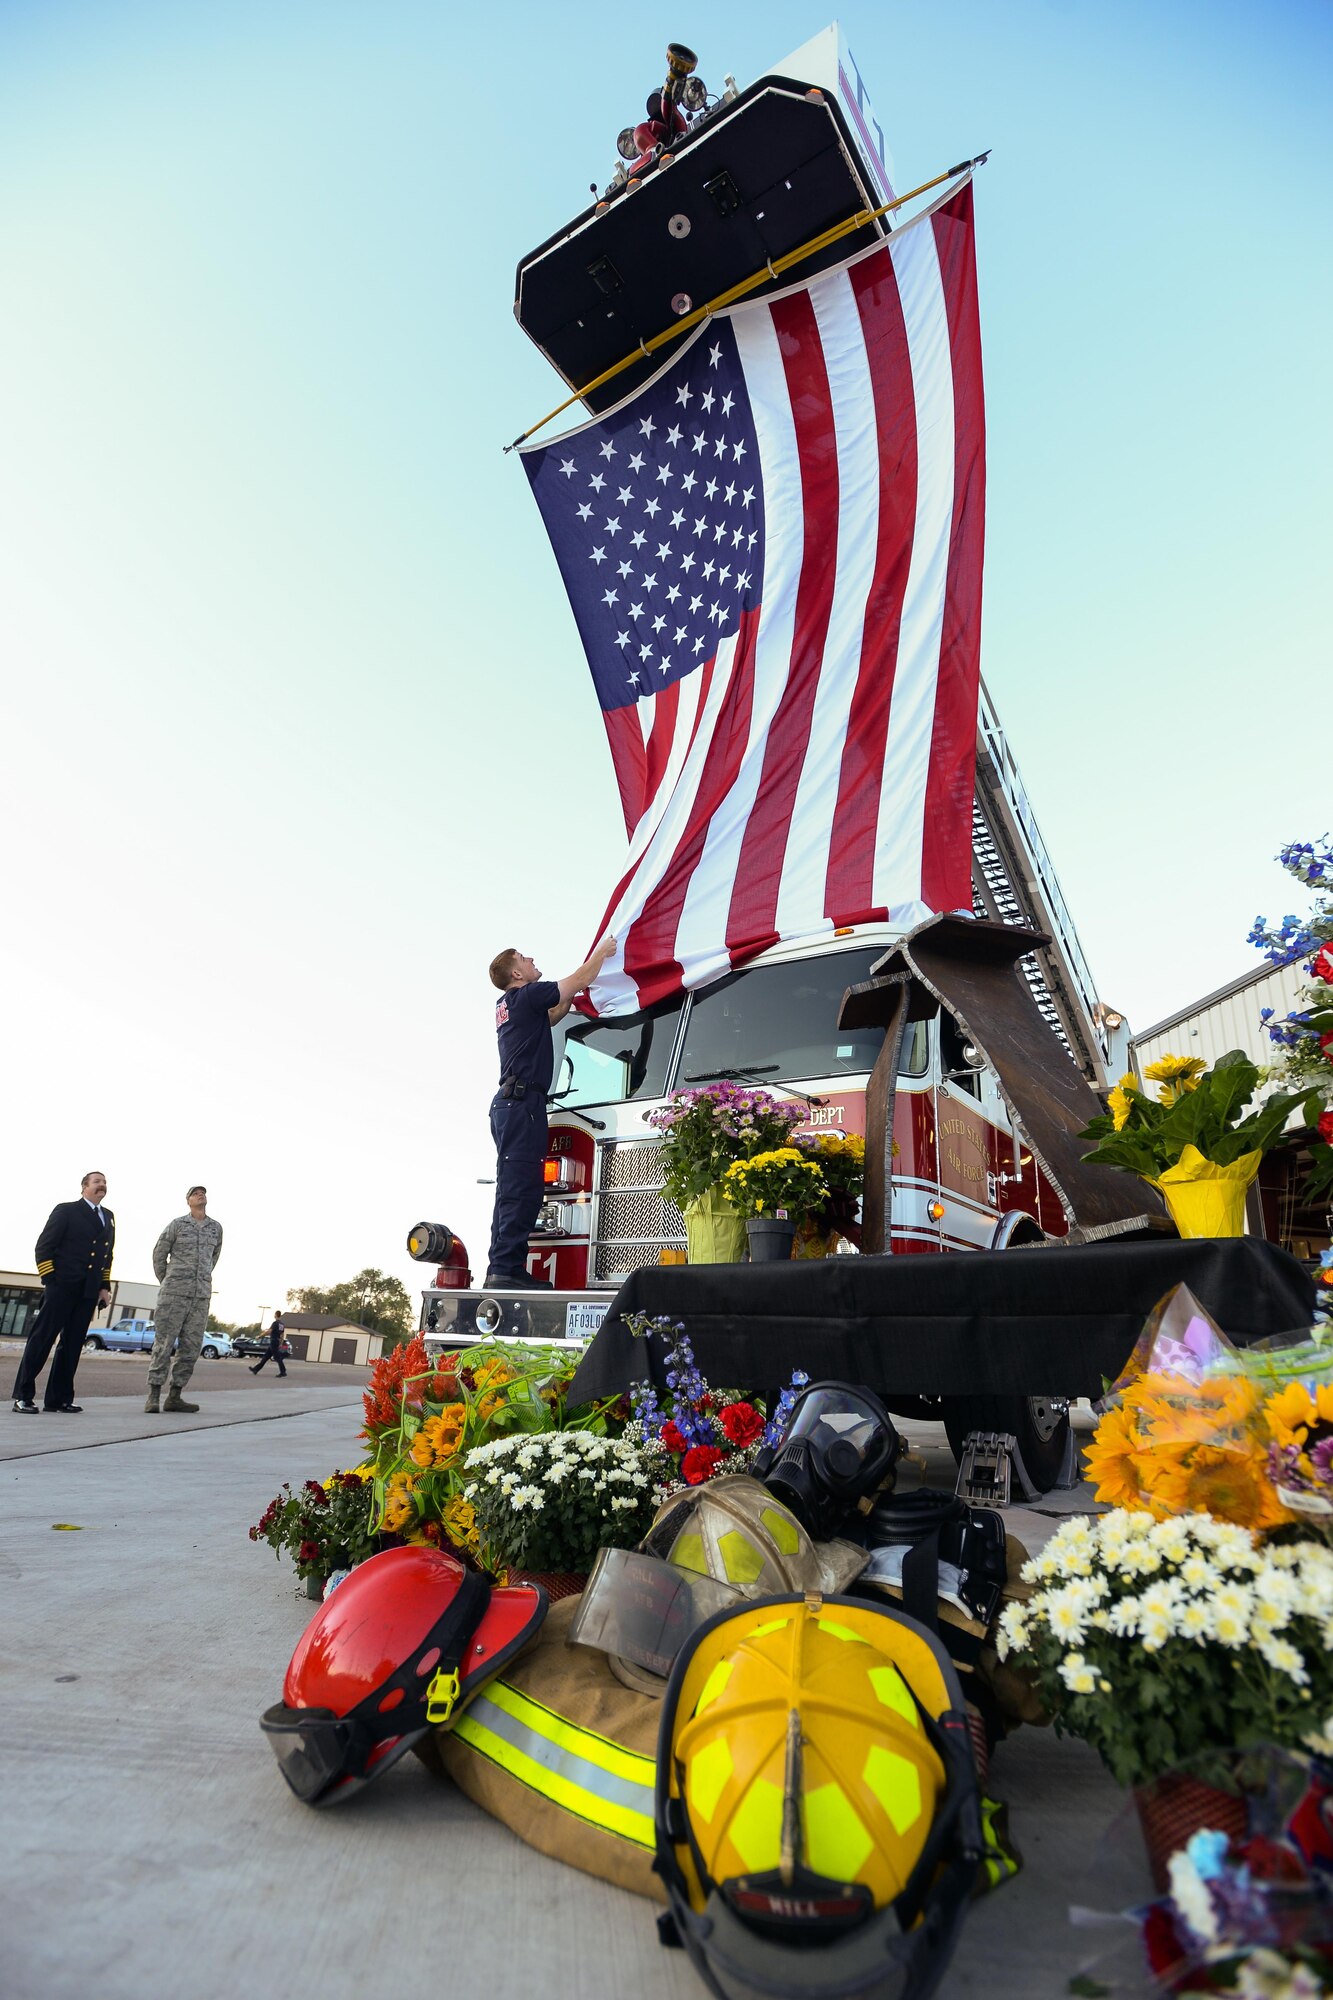 A firefighter arranges the bottom of an 18-foot long flag that was used for a 9/11 remembrance display in front of Fire House No. 1 at Hill Air Force Base, Utah, Sept. 11, 2015. The display included two iron girders, one from each of the World Trade Center Buildings, firefighter gear and flowers donated by local businesses. (U.S. Air Force photo/R. Nial Bradshaw)